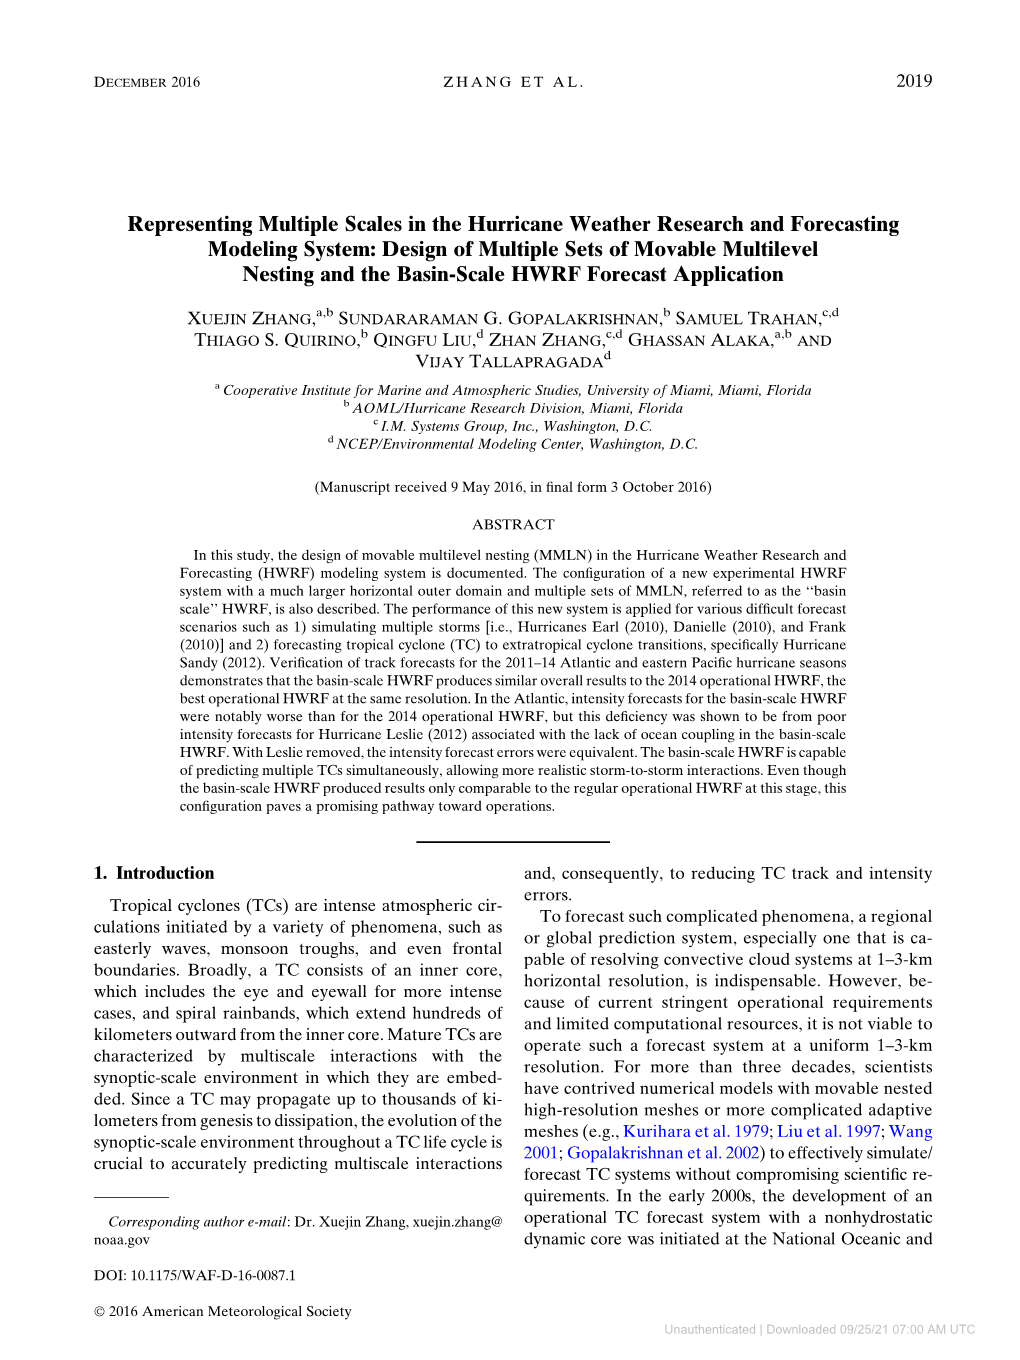 Representing Multiple Scales in the Hurricane Weather Research and Forecasting Modeling System